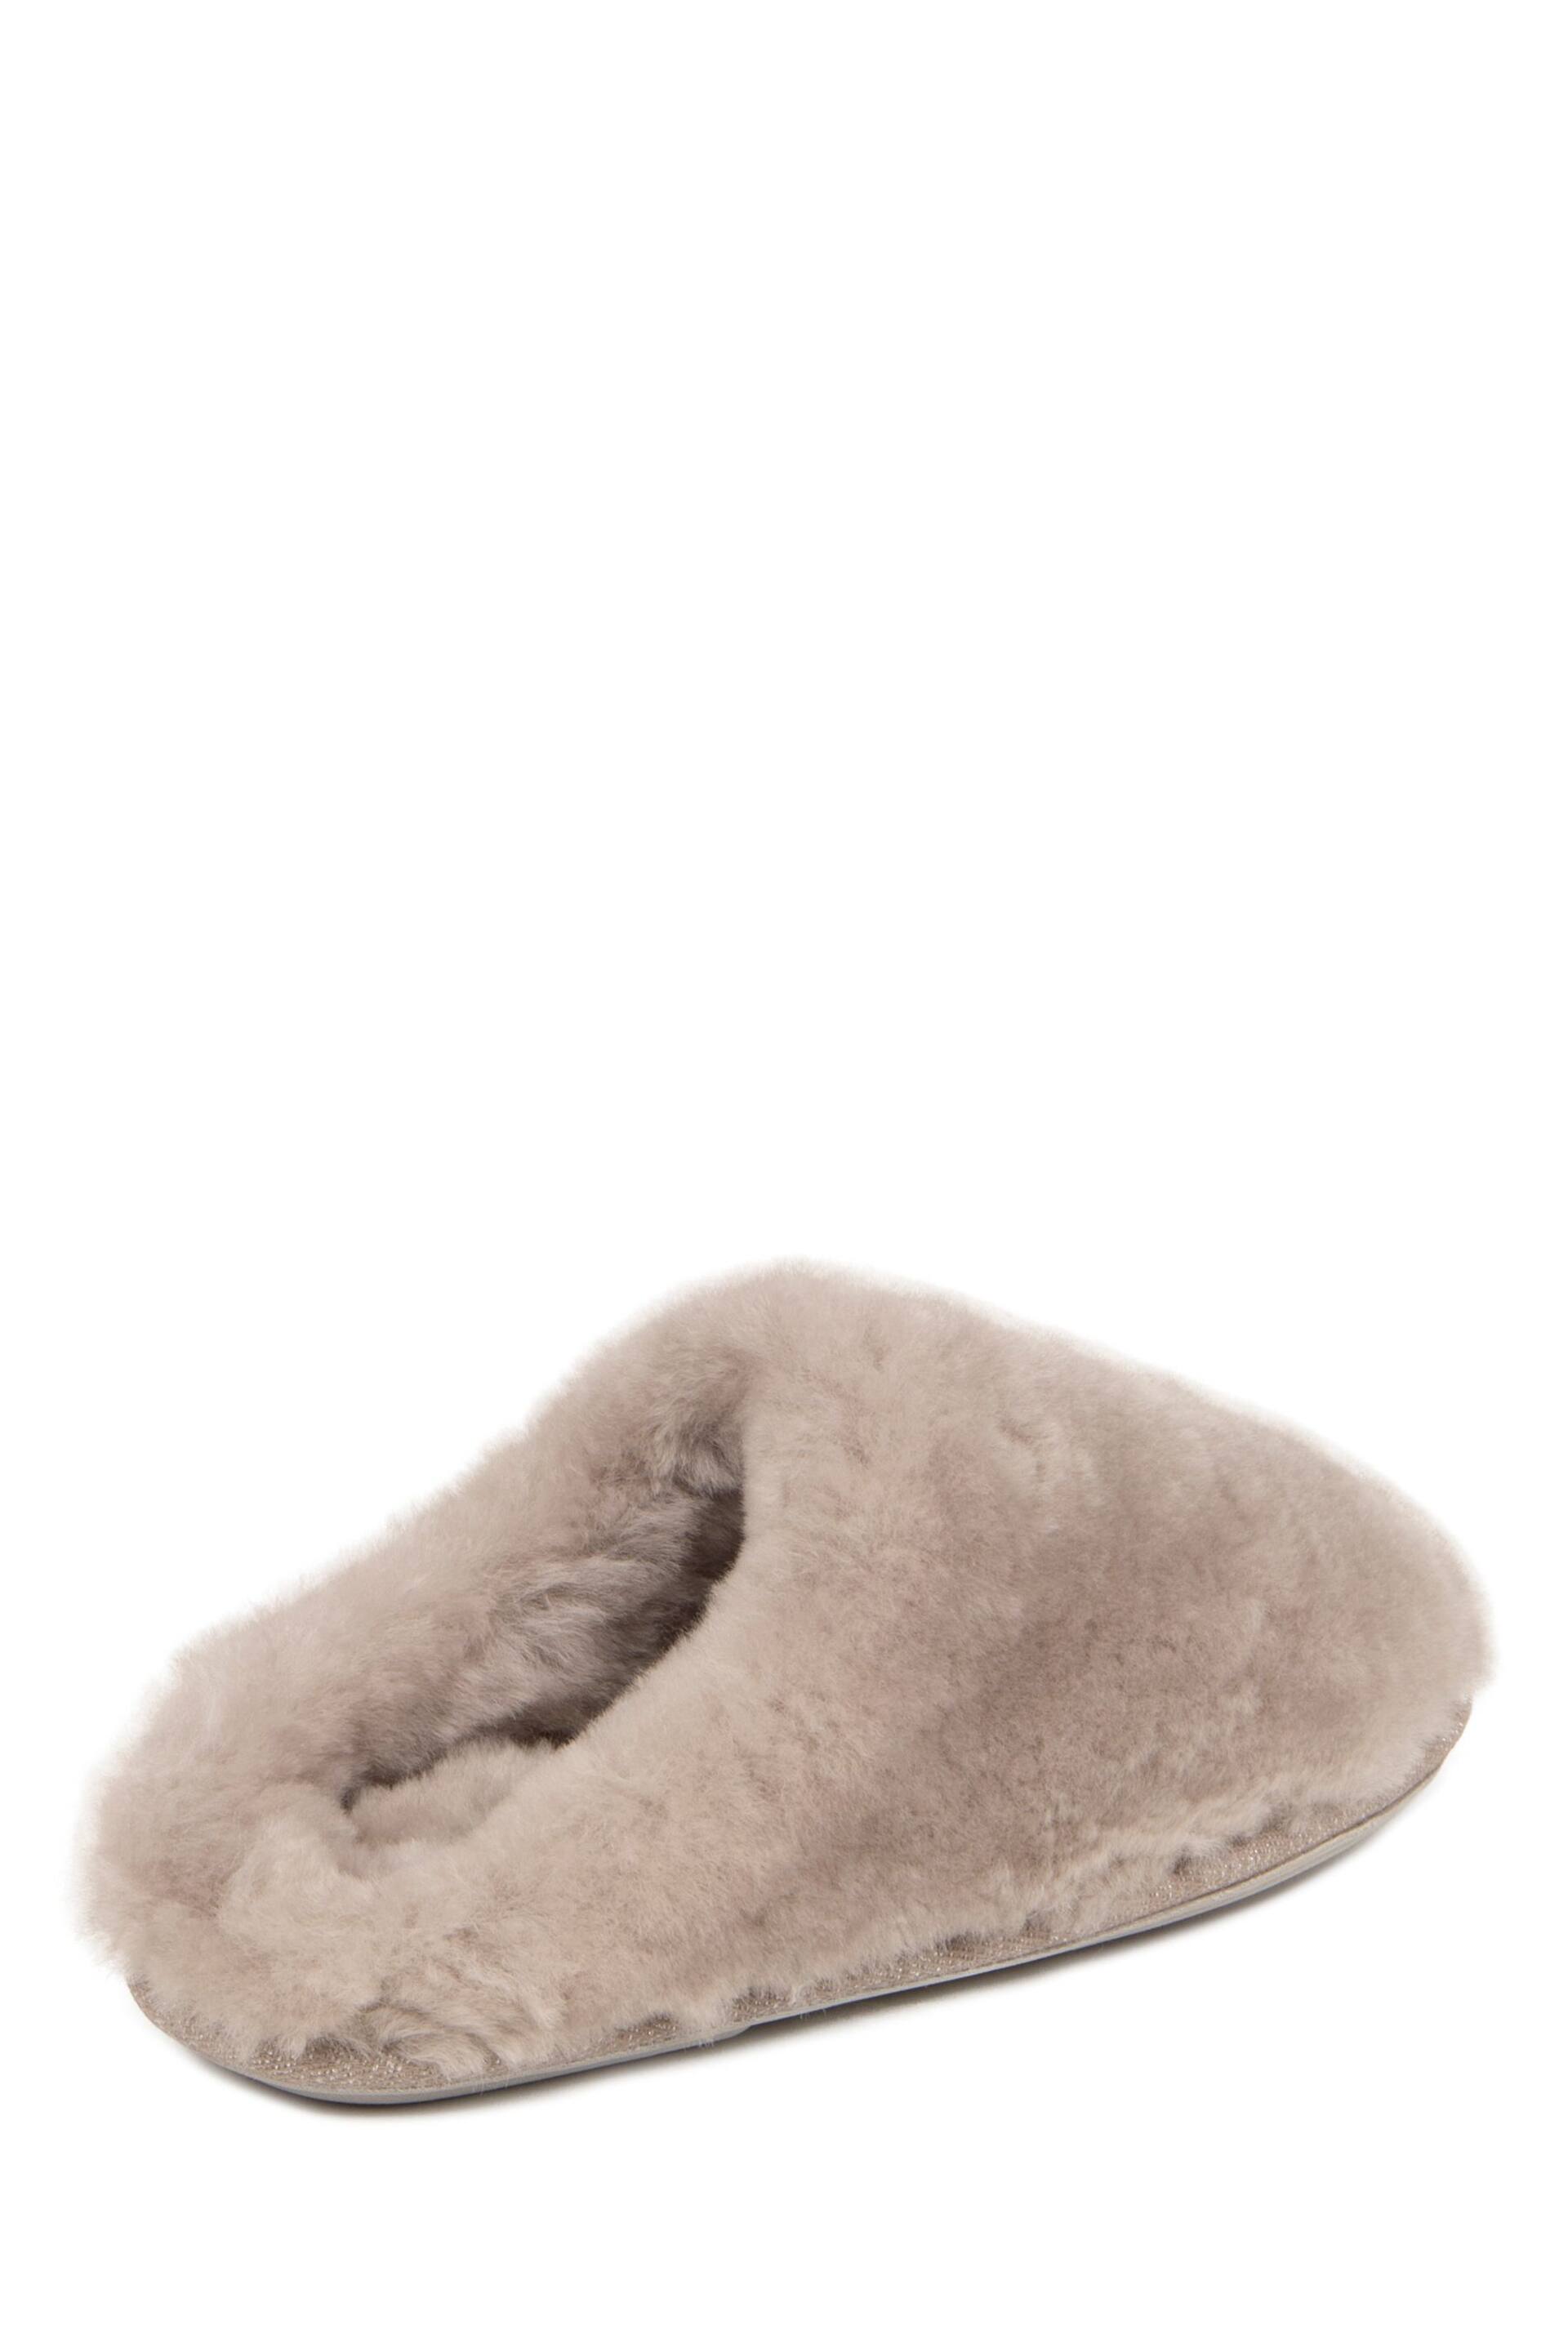 Just Sheepskin Grey Mens Donmar Slippers - Image 4 of 5